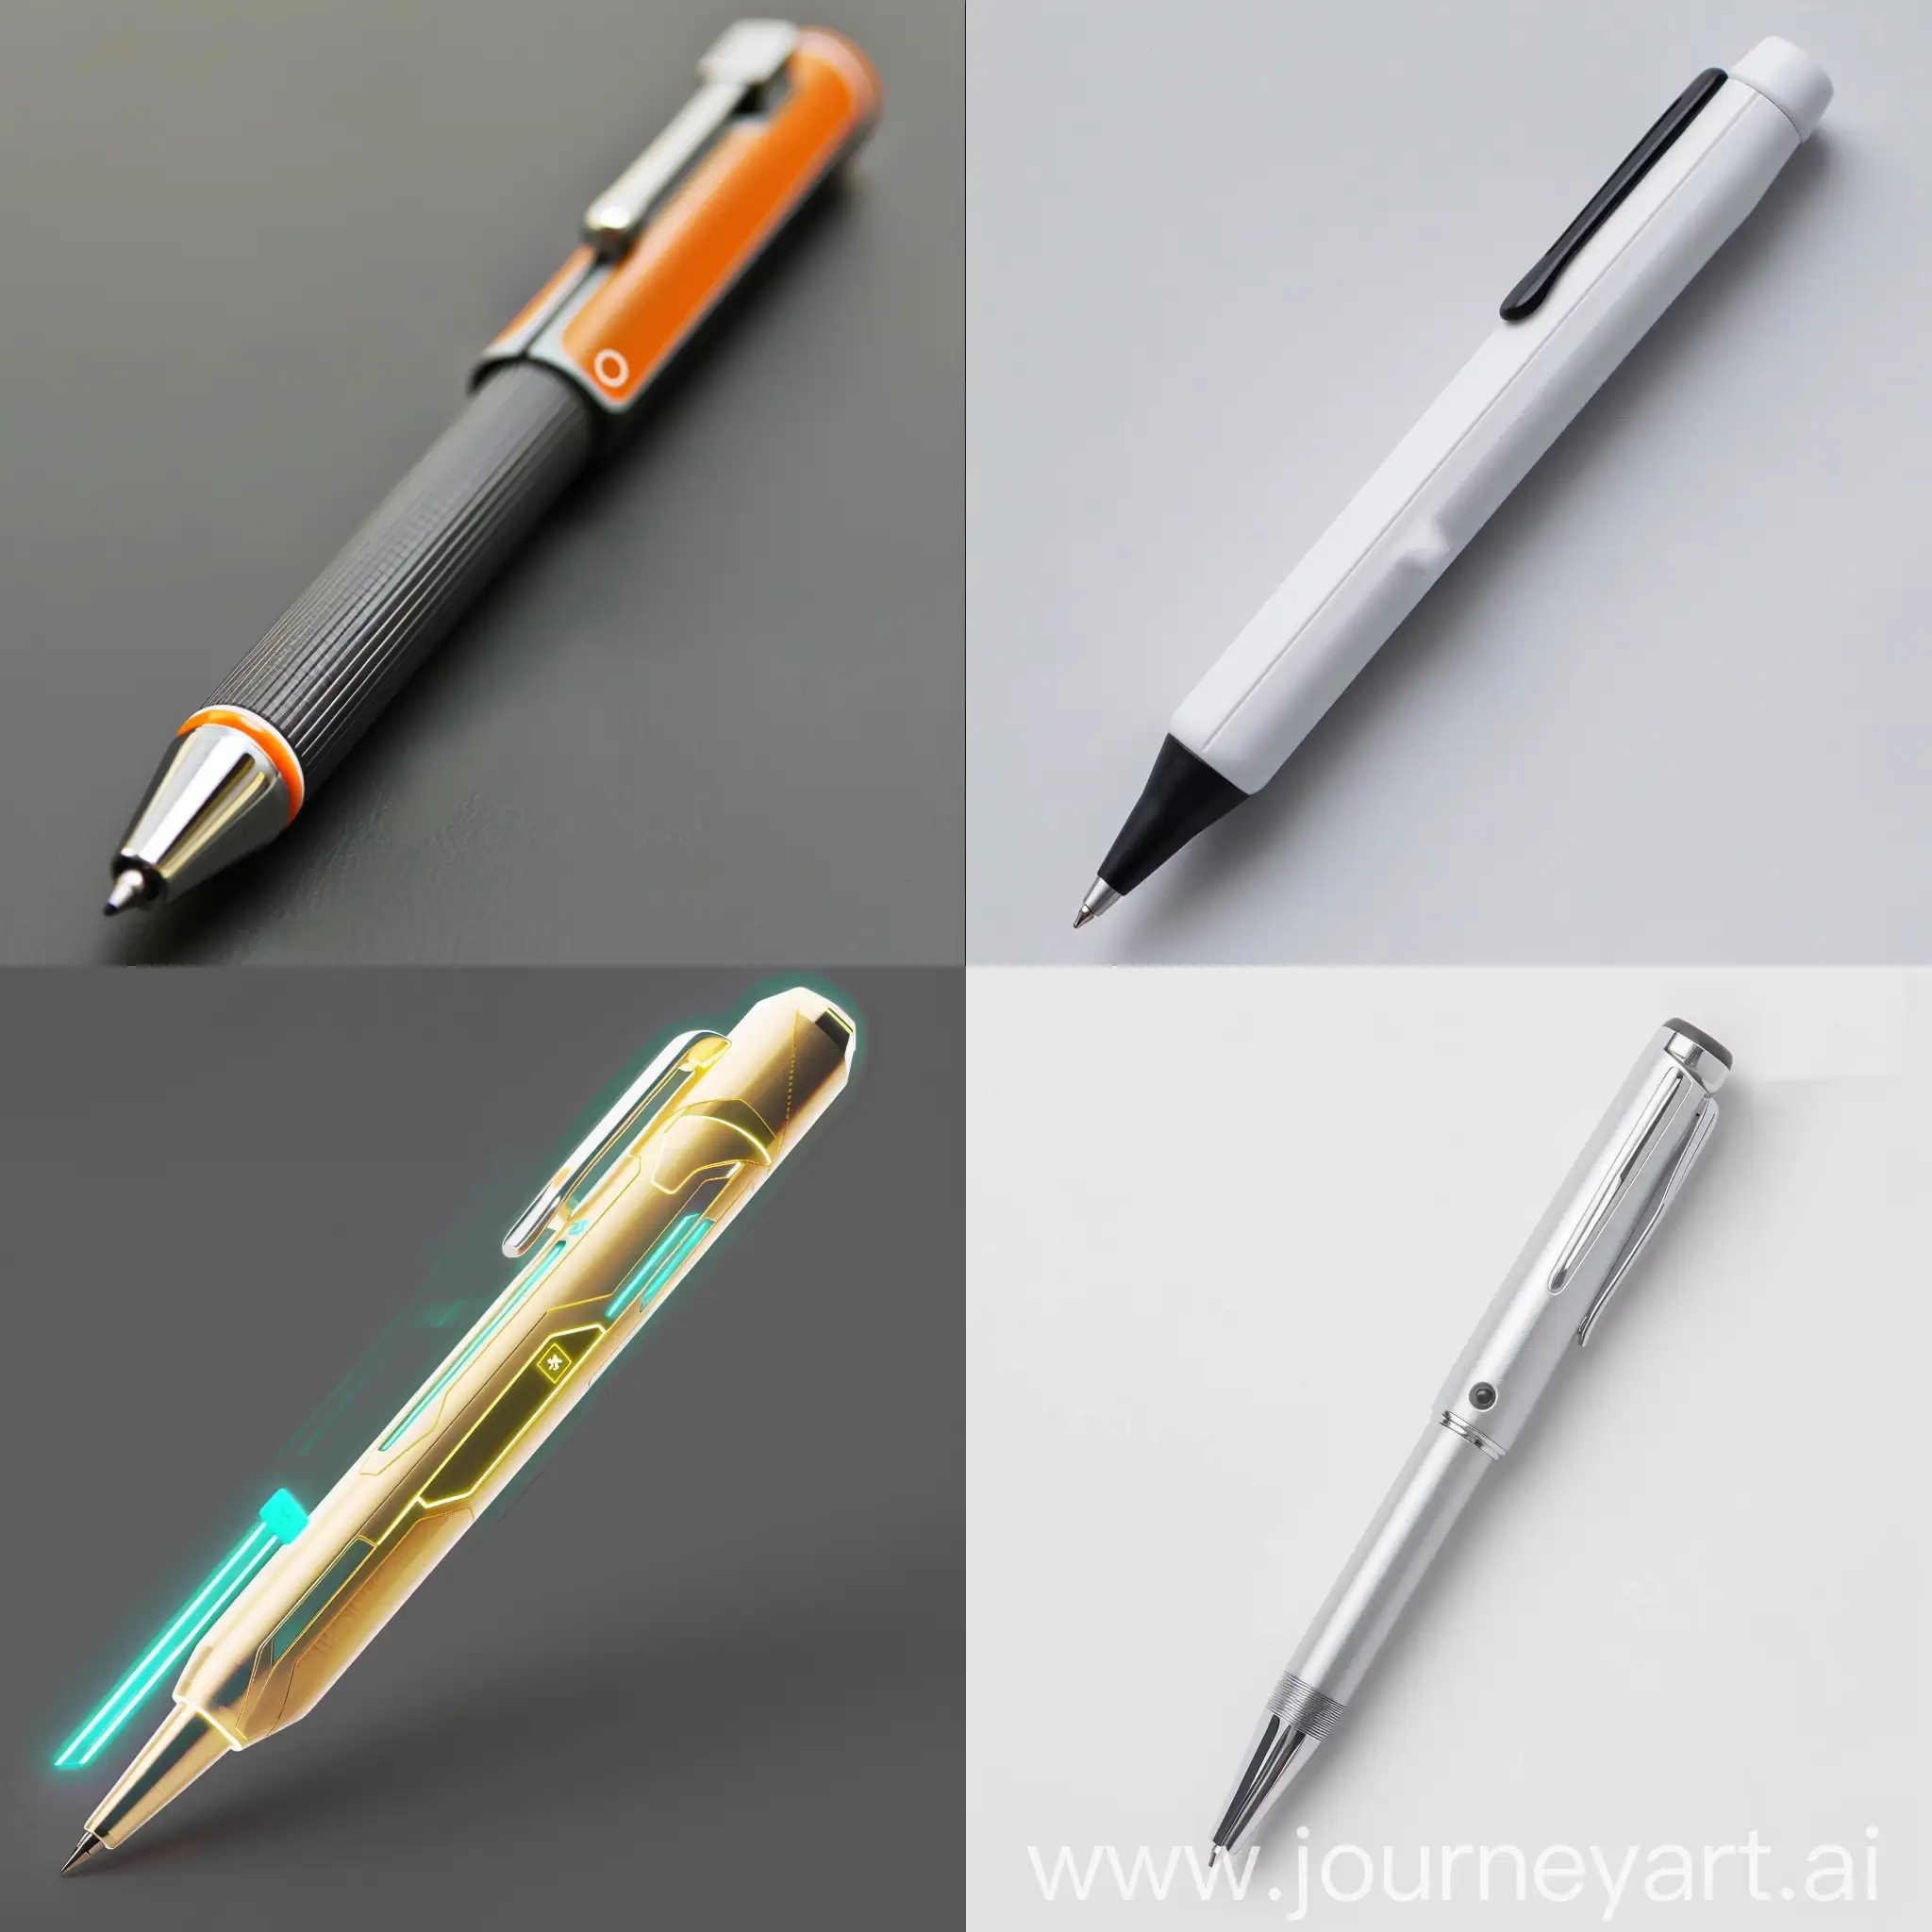 imagine a smart pen. A pen that tells students how to hold it correctly.